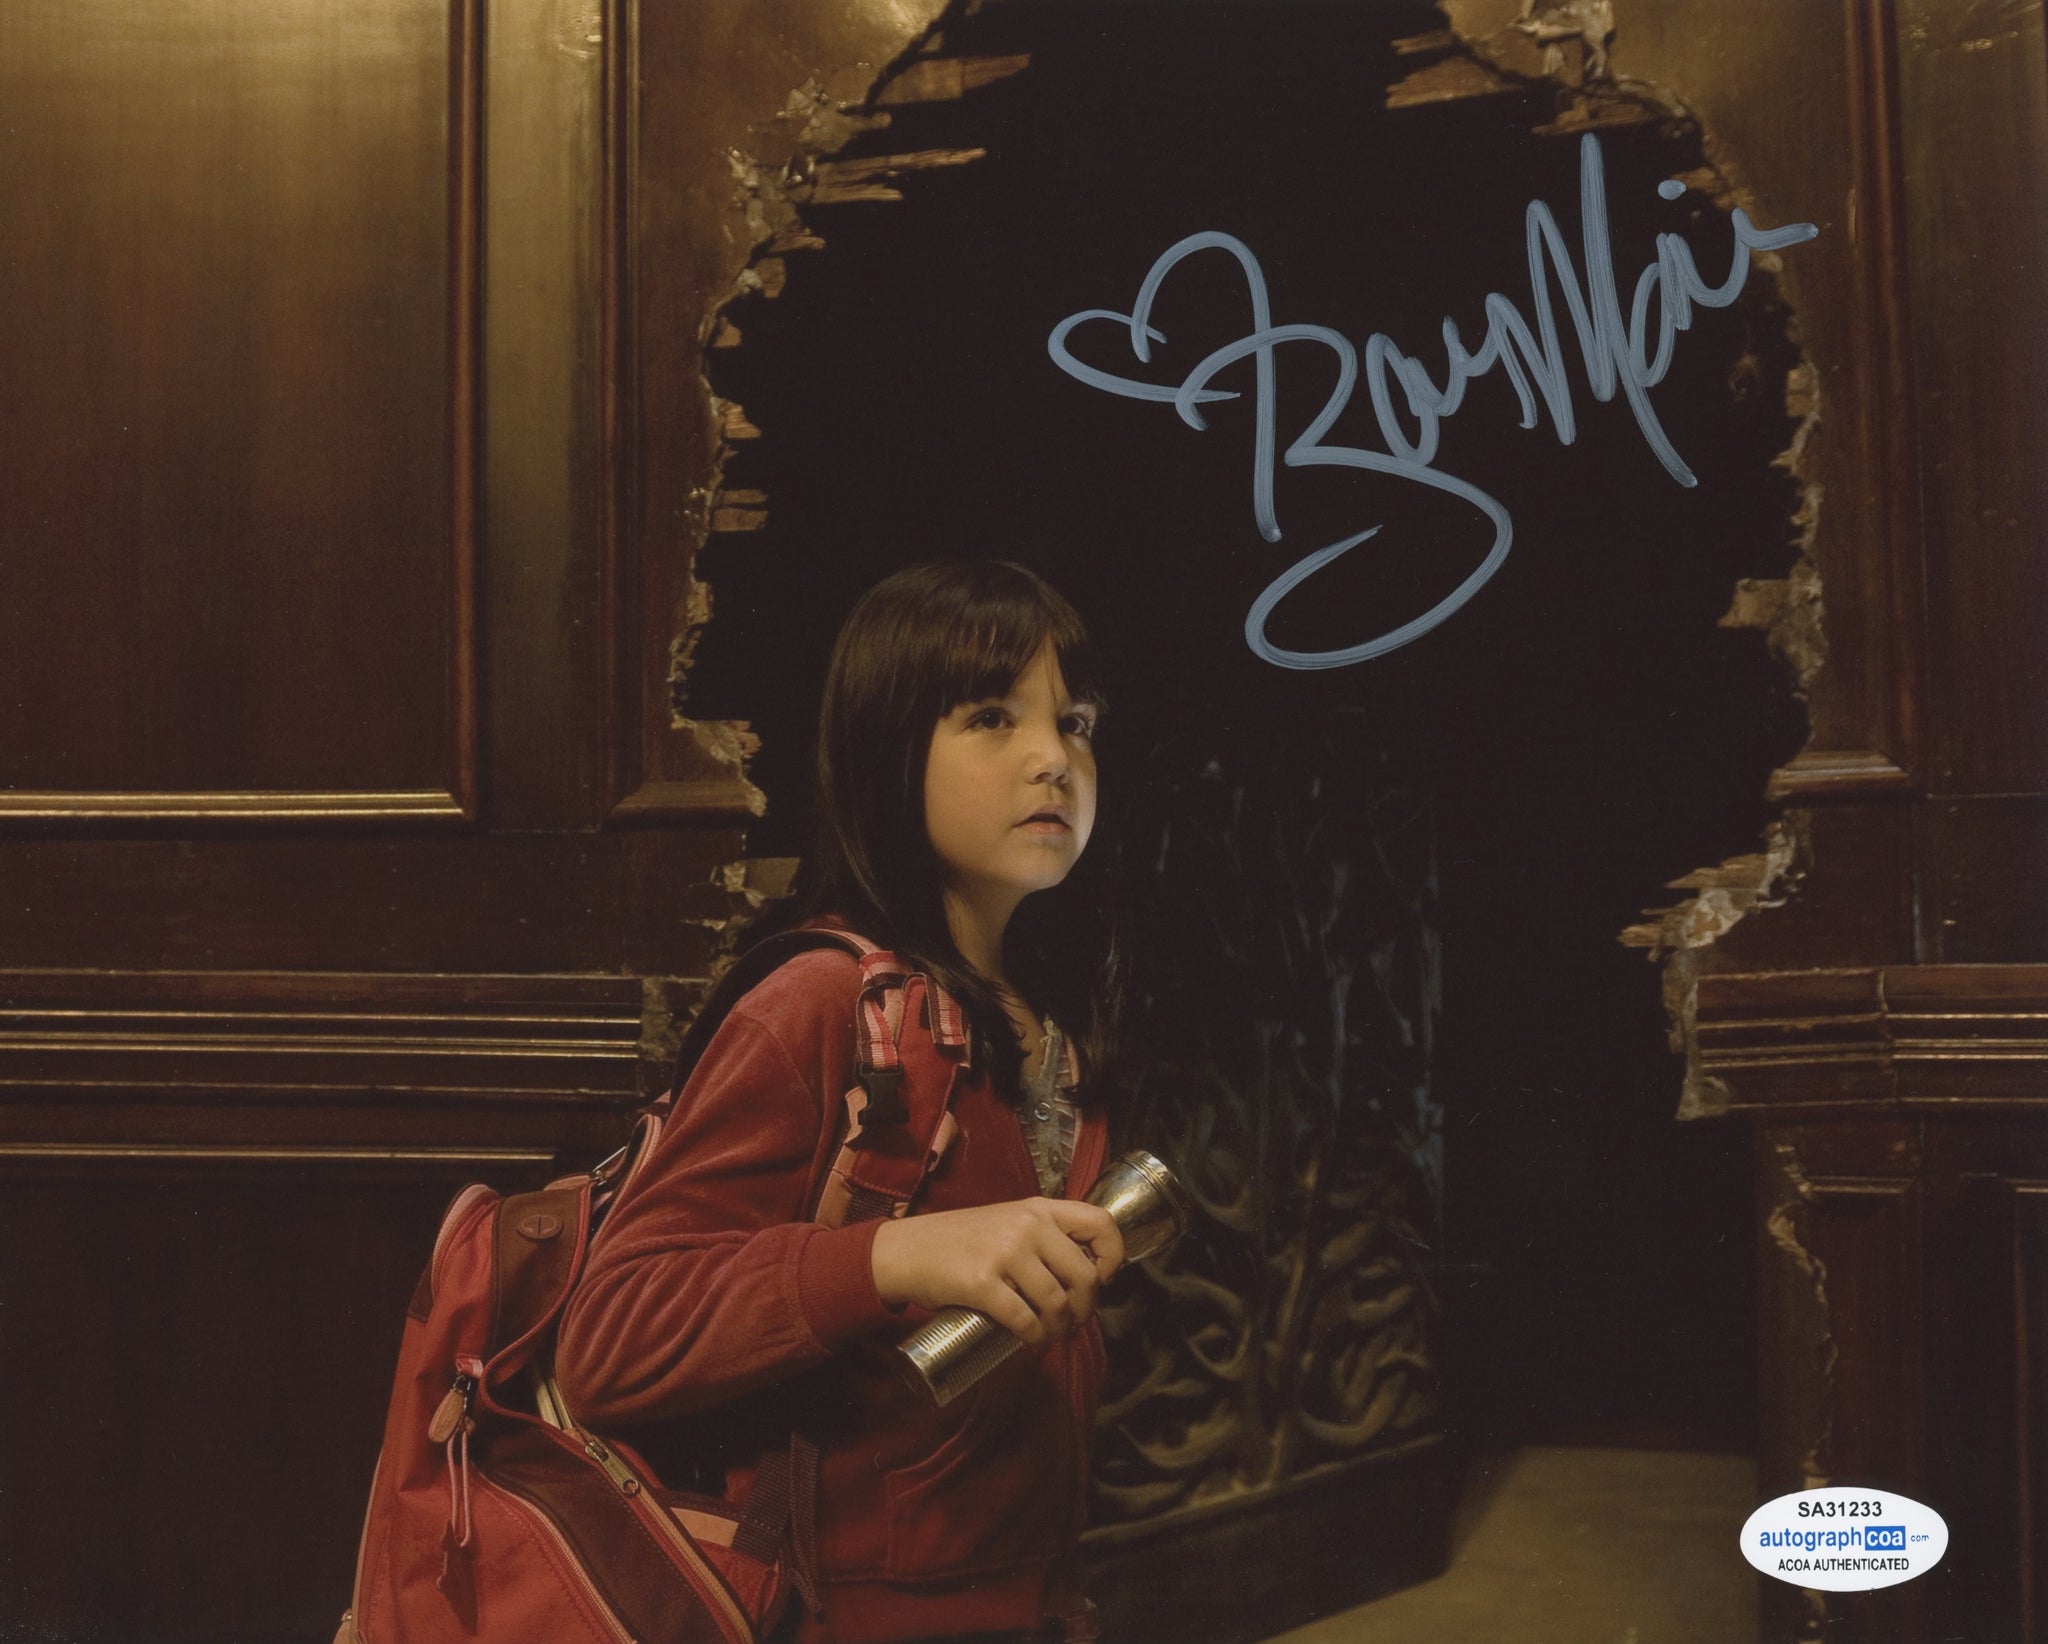 Bailee Madison Afraid of the Dark Signed Autograph 8x10 Photo ACOA #19 - Outlaw Hobbies Authentic Autographs